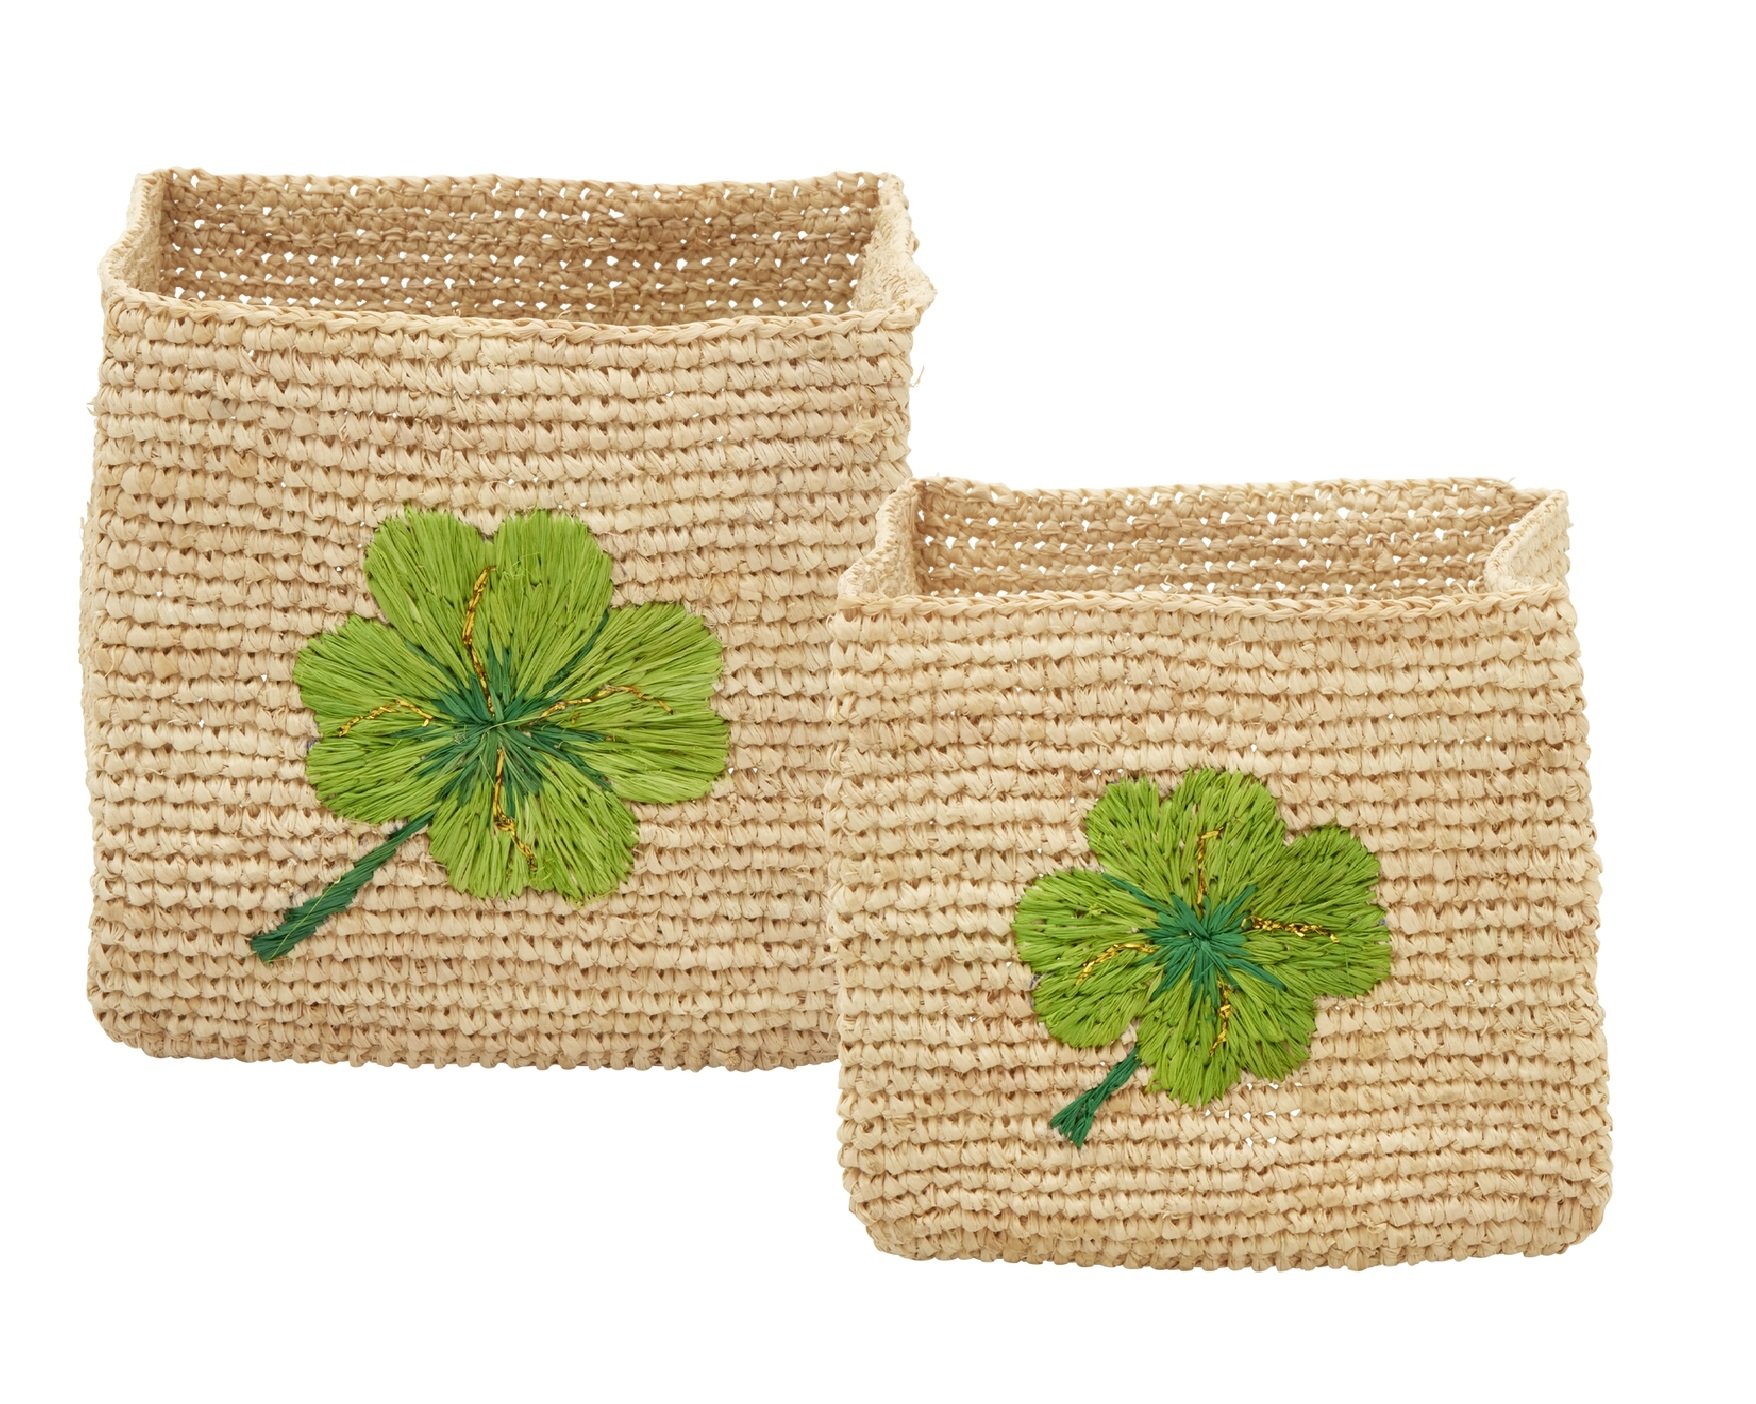 Rice - Square Raffia Storage Small and Large Nature/Clover Embroidery